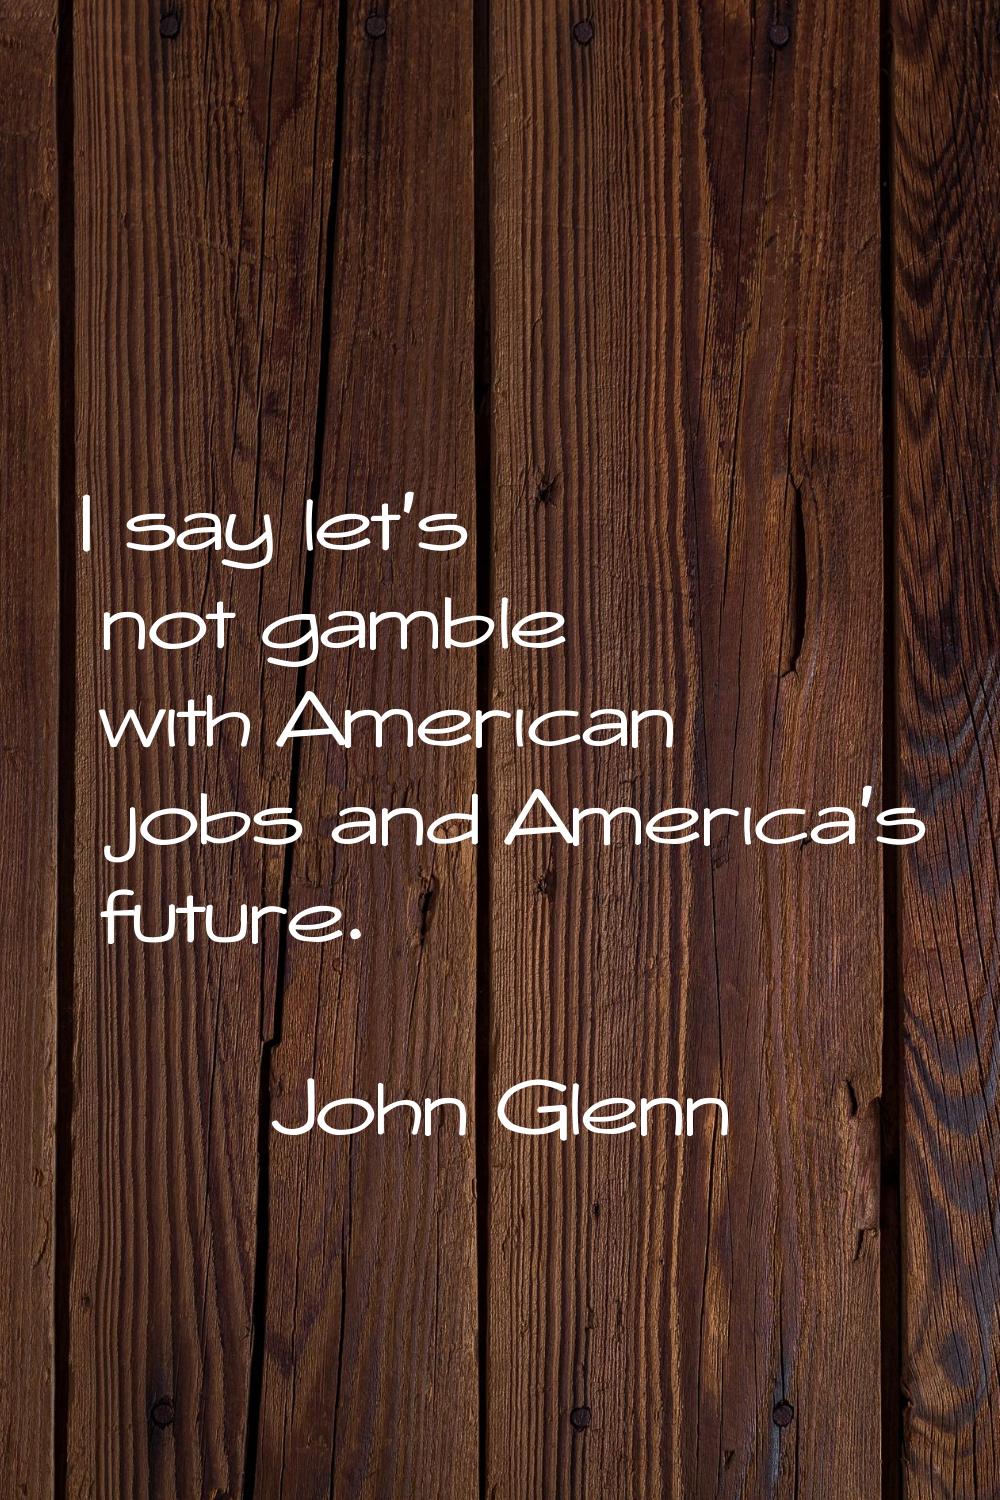 I say let's not gamble with American jobs and America's future.